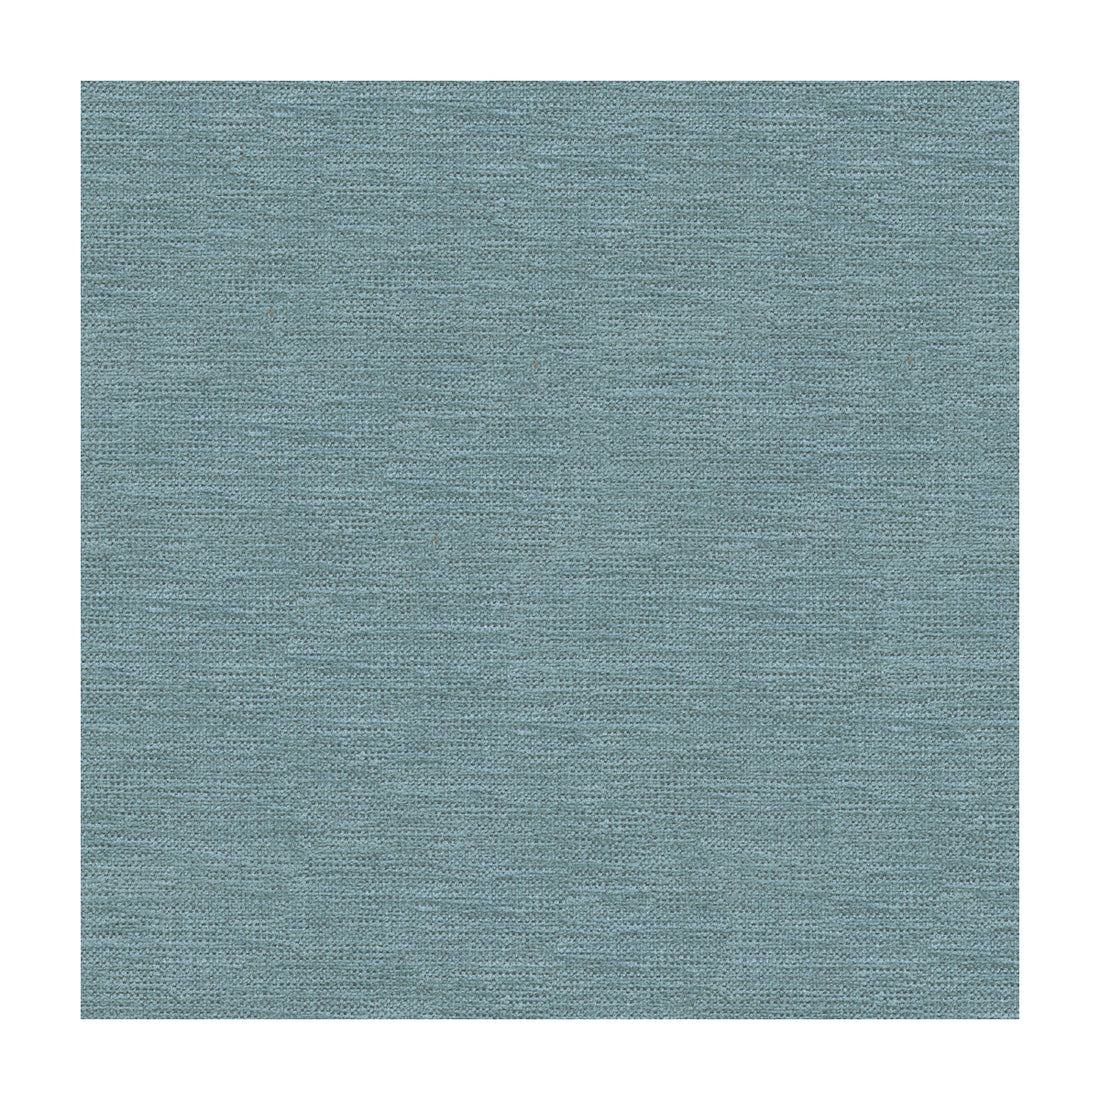 Kravet Smart fabric in 33831-115 color - pattern 33831.115.0 - by Kravet Smart in the Performance Crypton Home collection